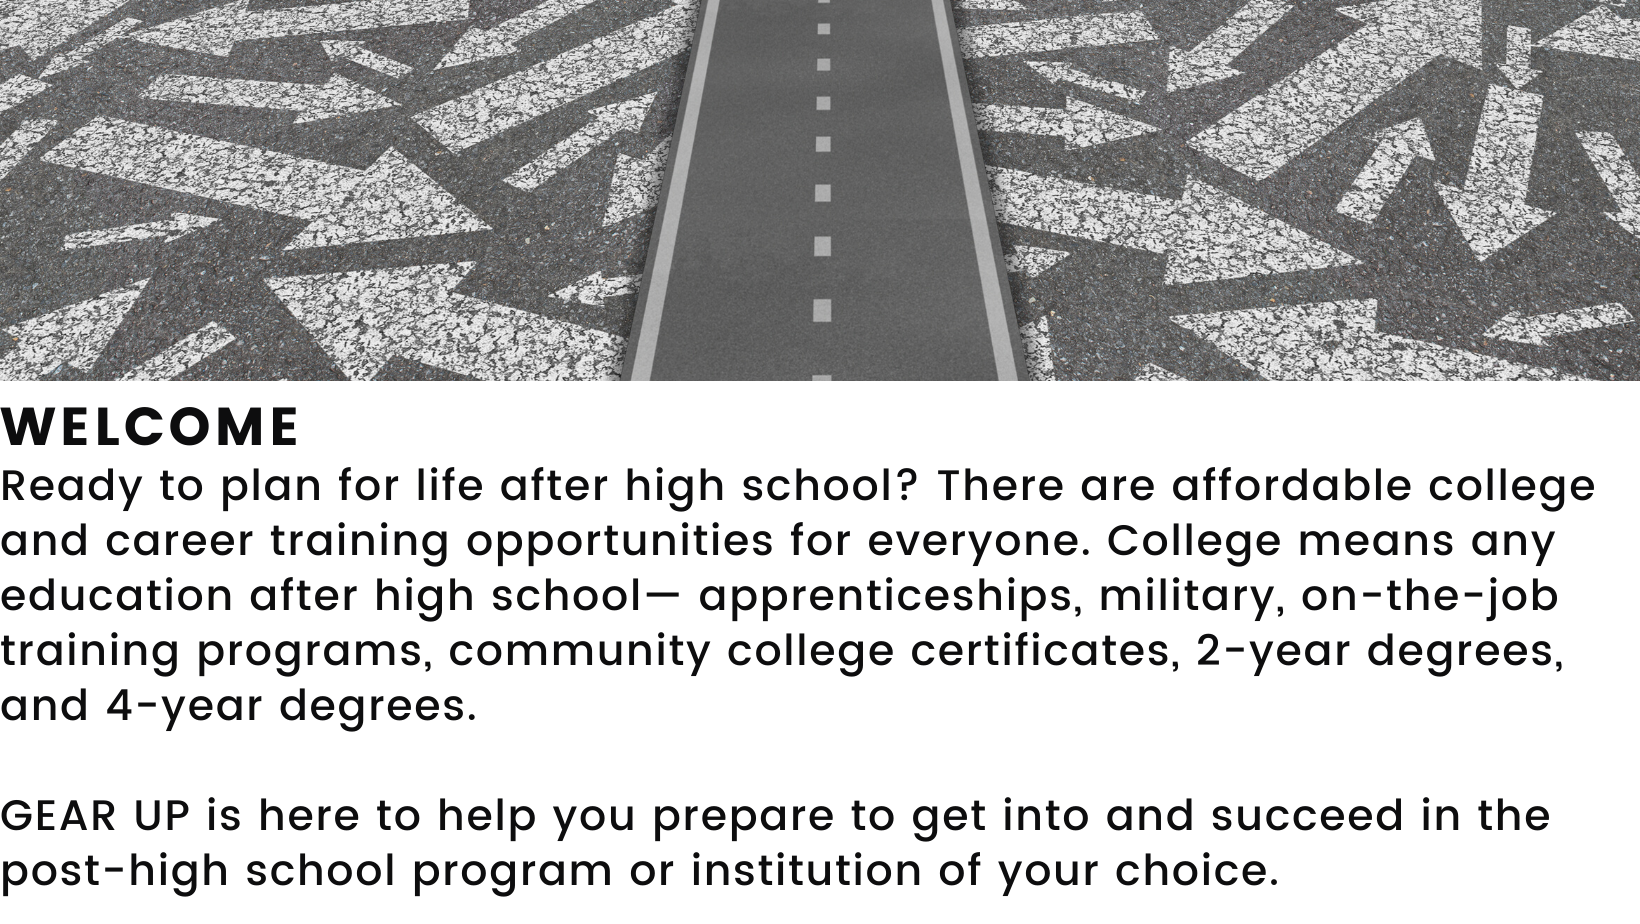 Decorative element featuring  a road and arrows.  States: Welcome! Ready to plan for life after high school? There are affordable college and career training opportunities for everyone. College means any education after high school— apprenticeships, military, on-the-job training programs, community college certificates, 2-year degrees, and 4-year degrees. GEAR UP is here to help you prepare to get into and succeed in the post-high school program or institution of your choice. 